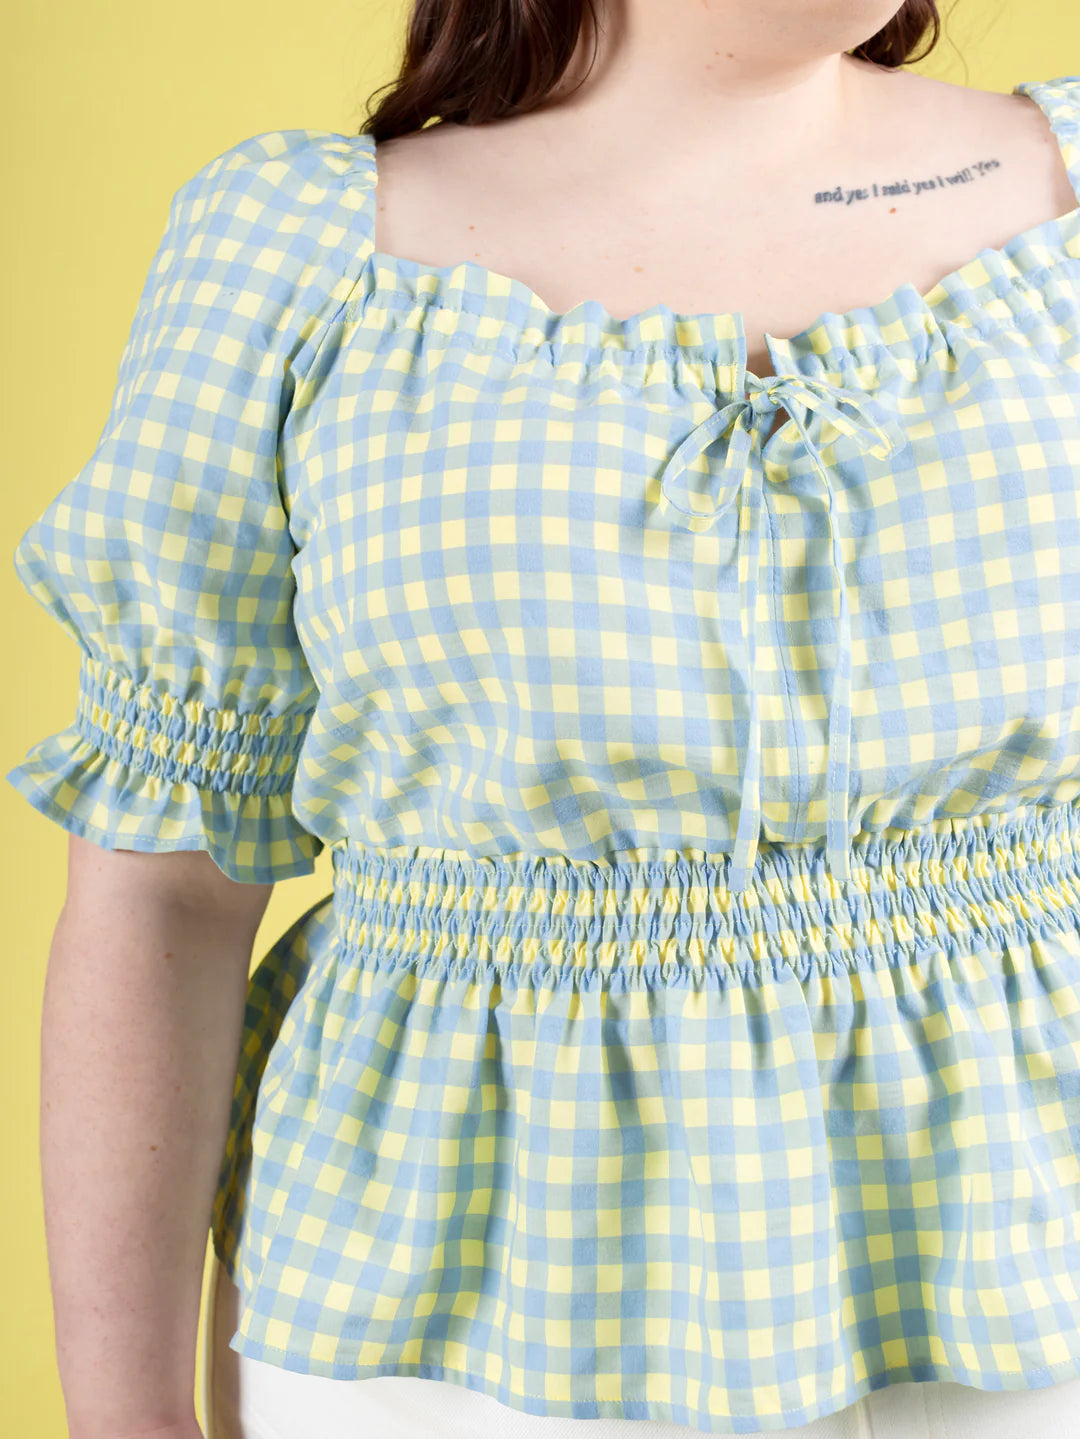 Tilly and the Buttons - Mabel Dress and Blouse Sewing Pattern (6-34)